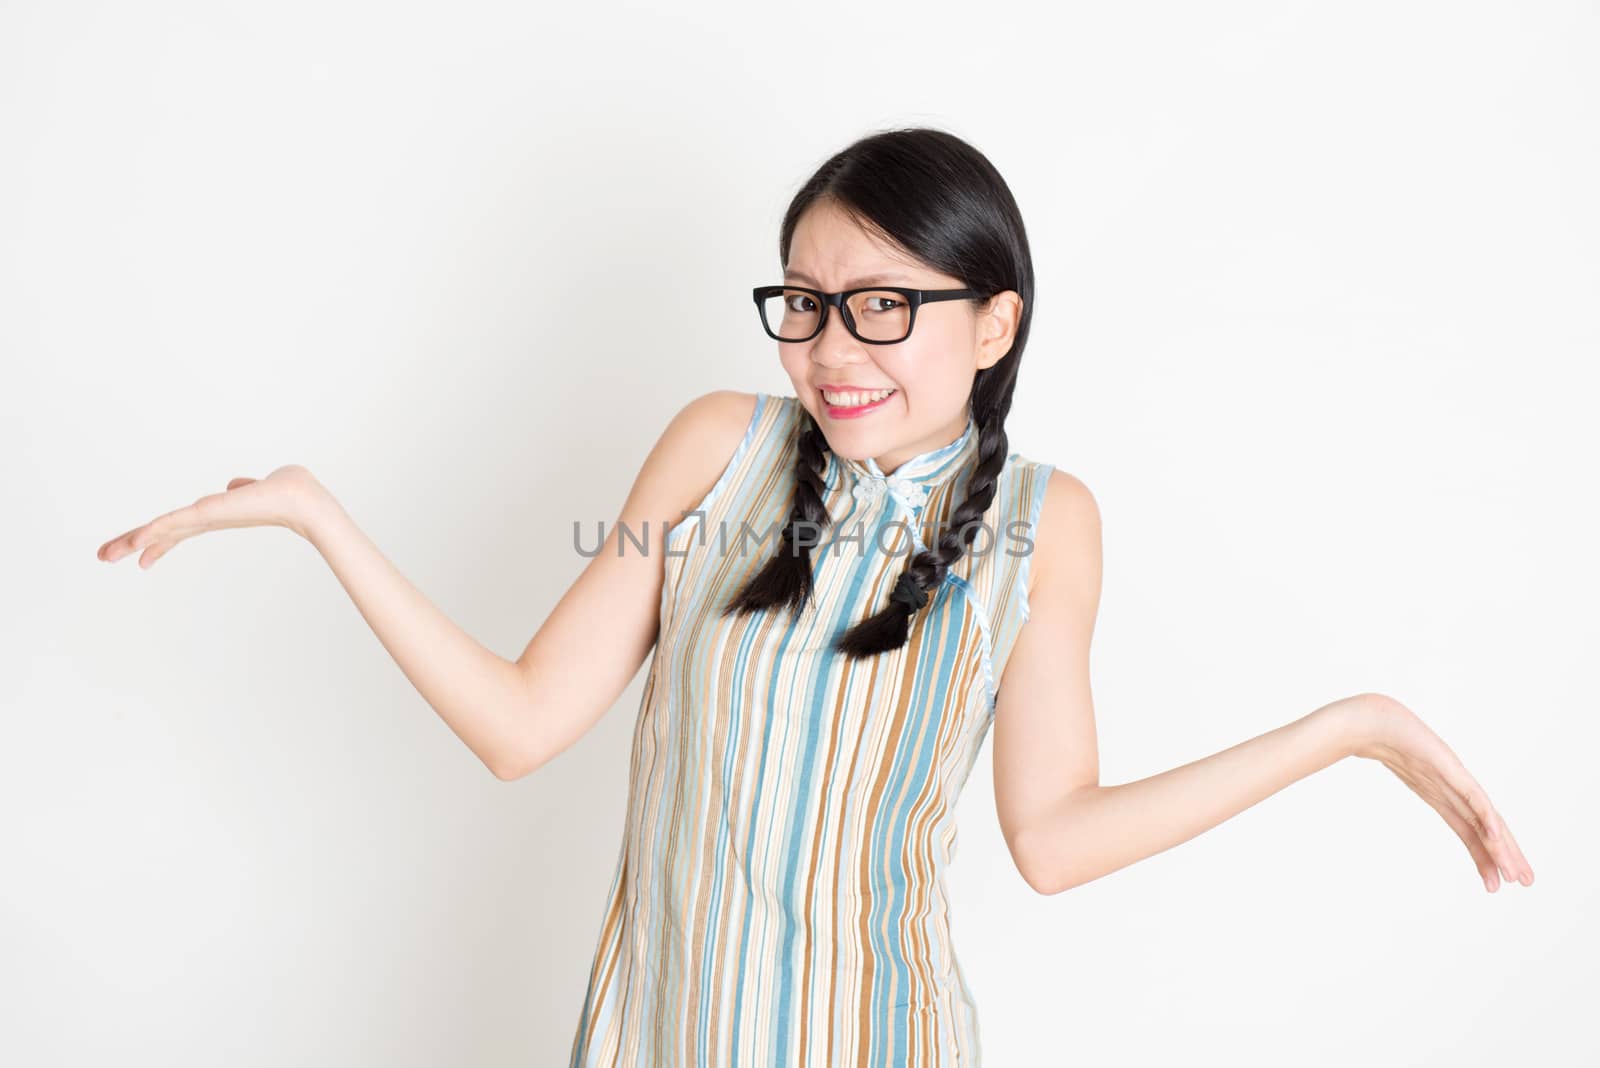 Portrait of young Asian girl in traditional qipao dress unsure and shrugging shoulder, standing on plain background.